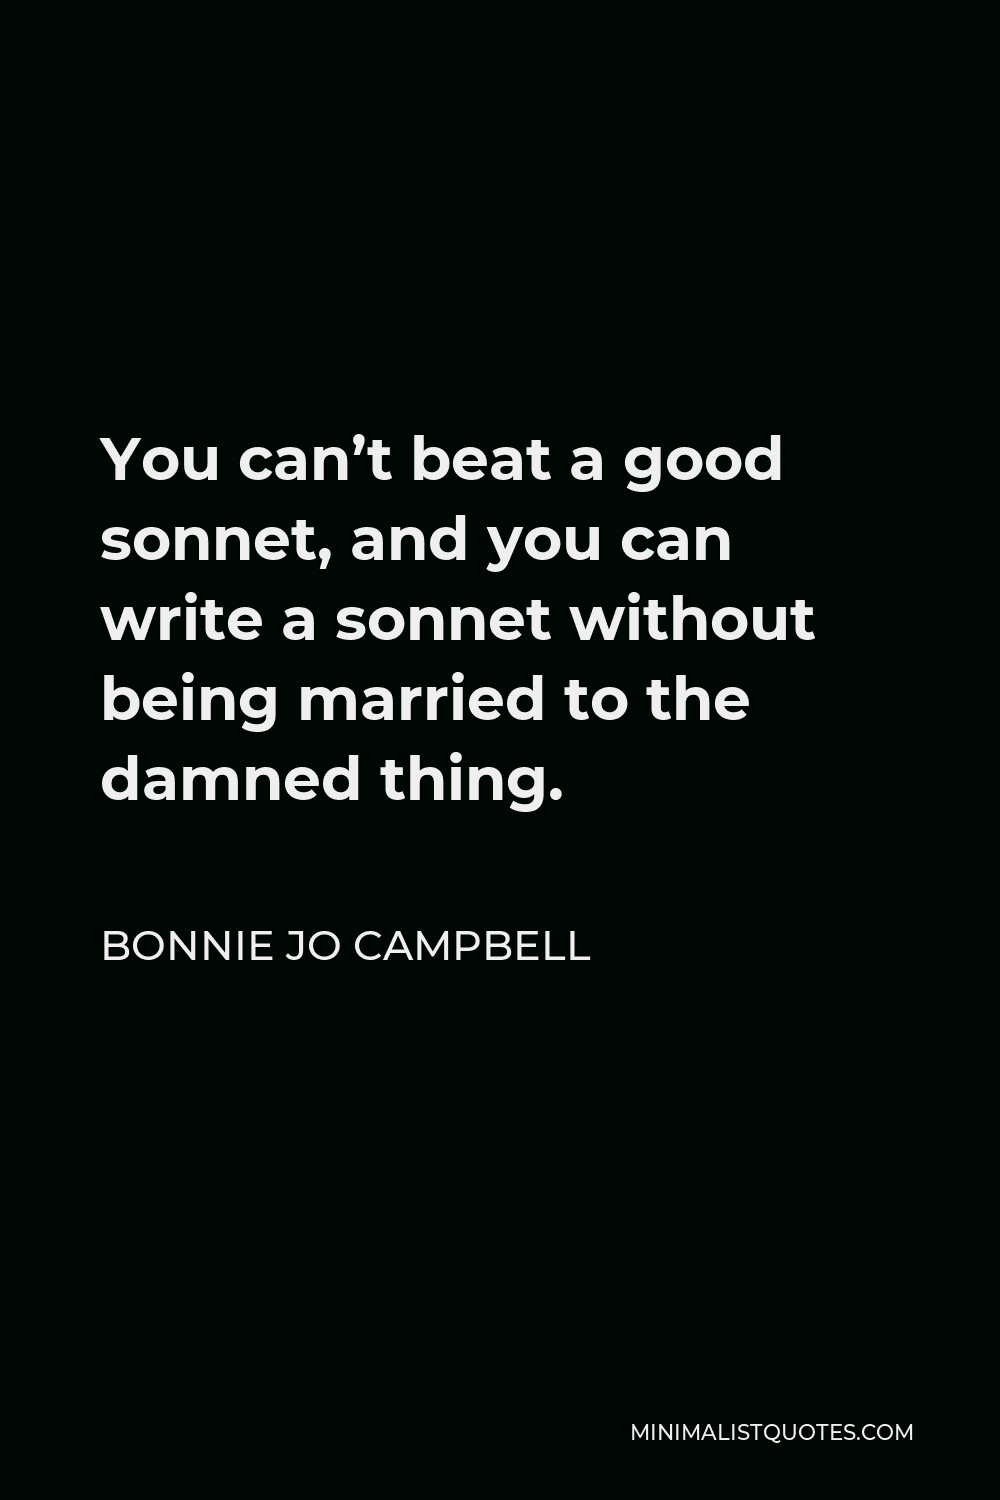 Bonnie Jo Campbell Quote - You can’t beat a good sonnet, and you can write a sonnet without being married to the damned thing.